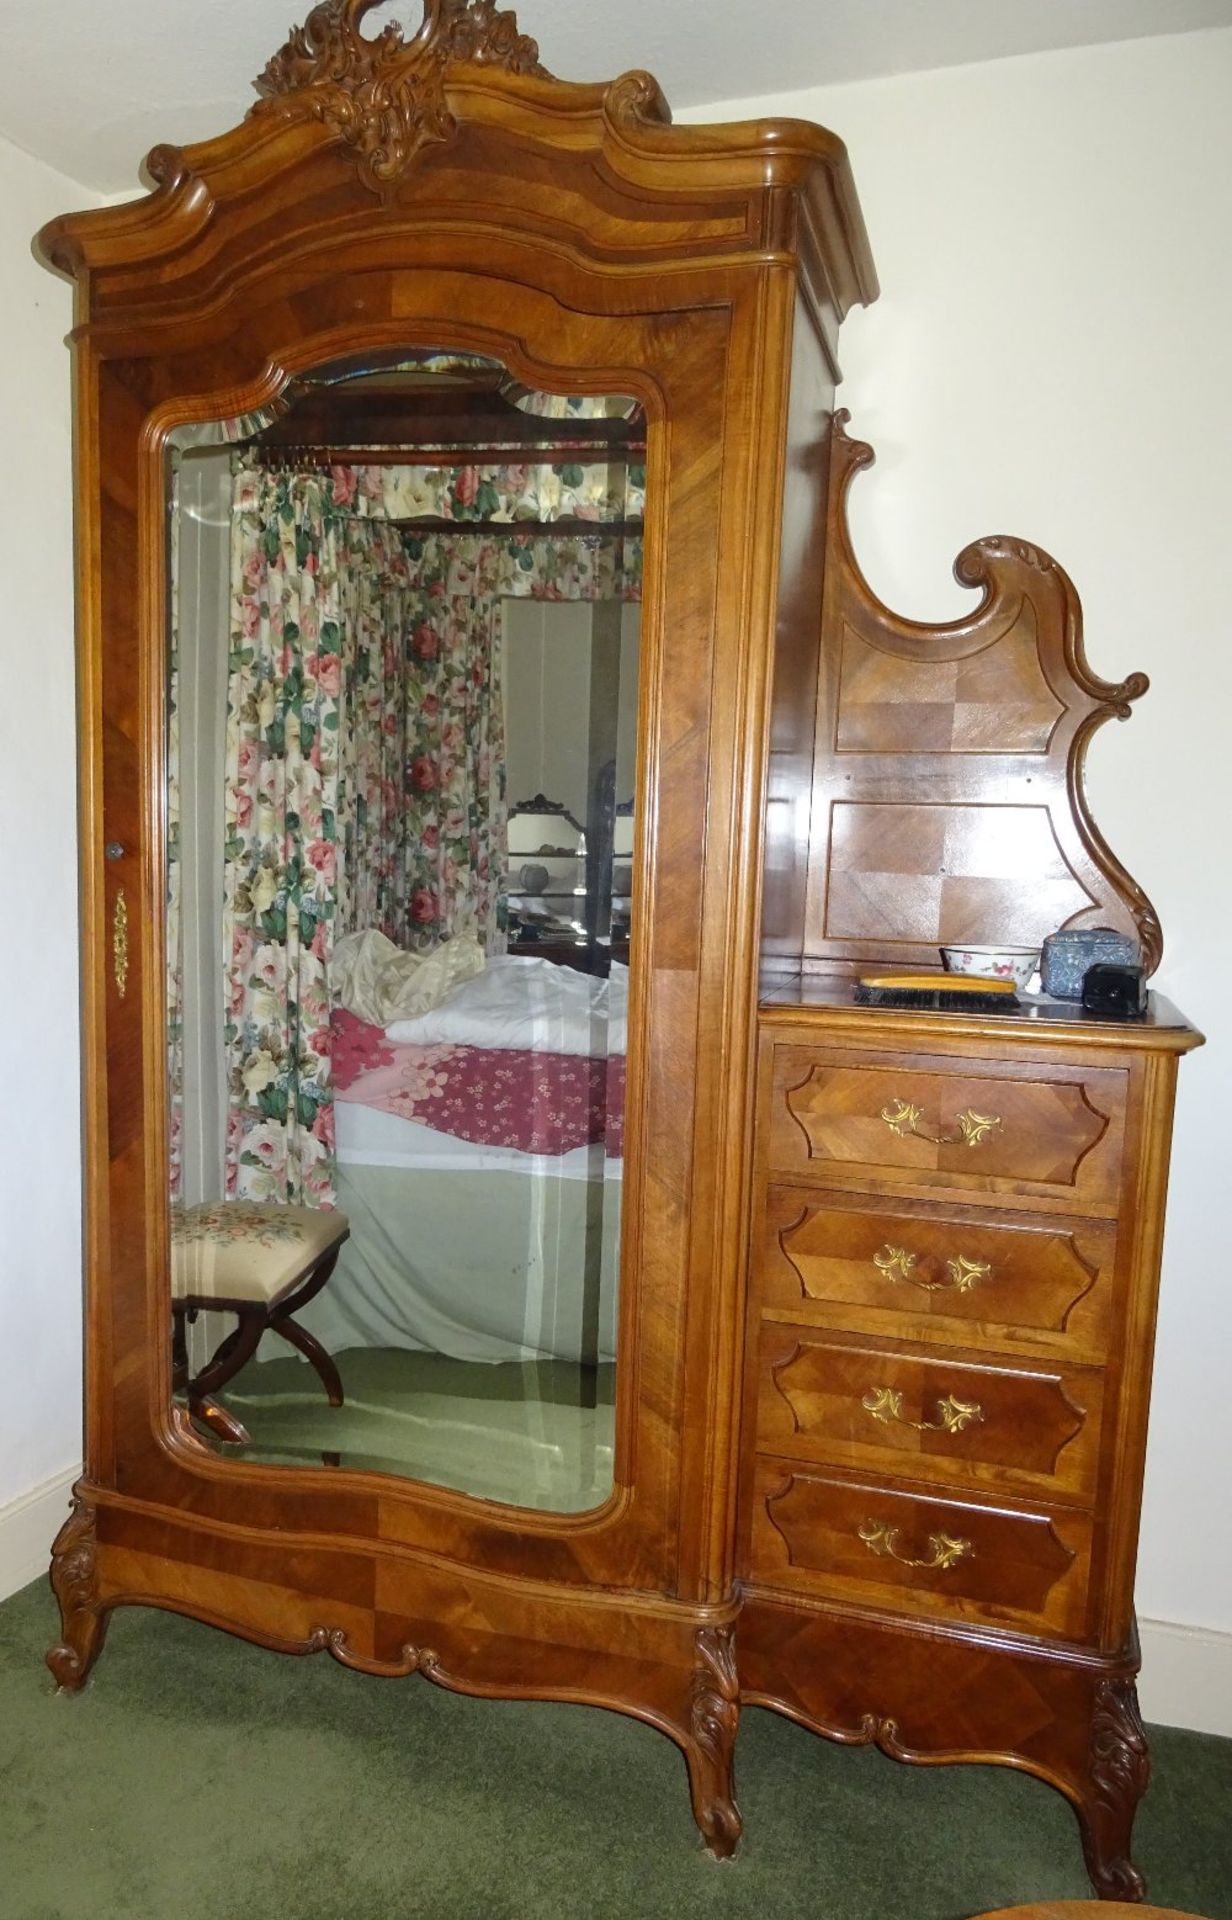 19TH CENTURY MAHOGANY ARMOIRE WARDROBE - FULL HANGING WARDROBE COMPLETE WITH FULL MIRRORED FRONT